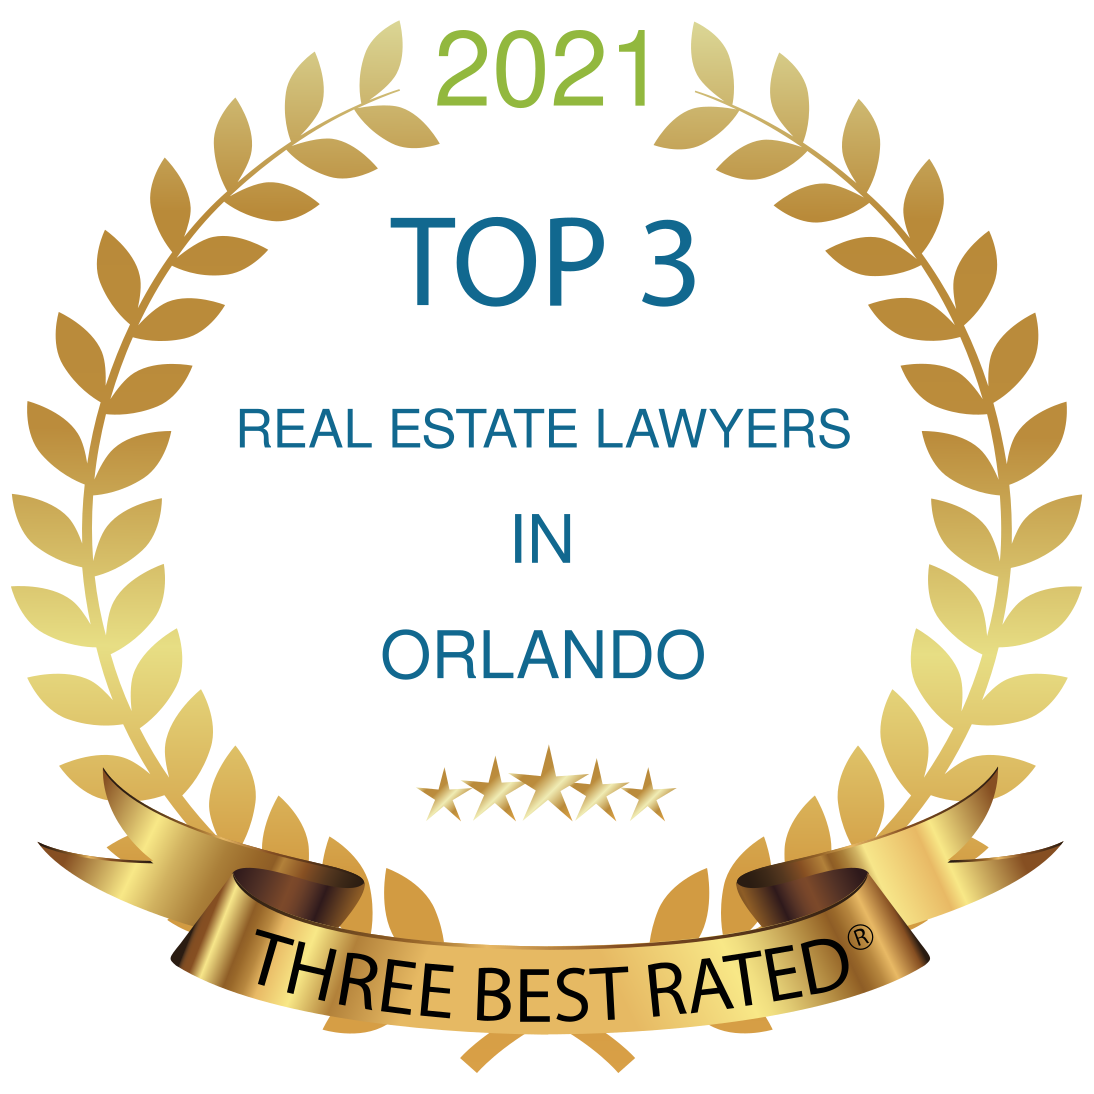 real estate lawyers in orlando badge